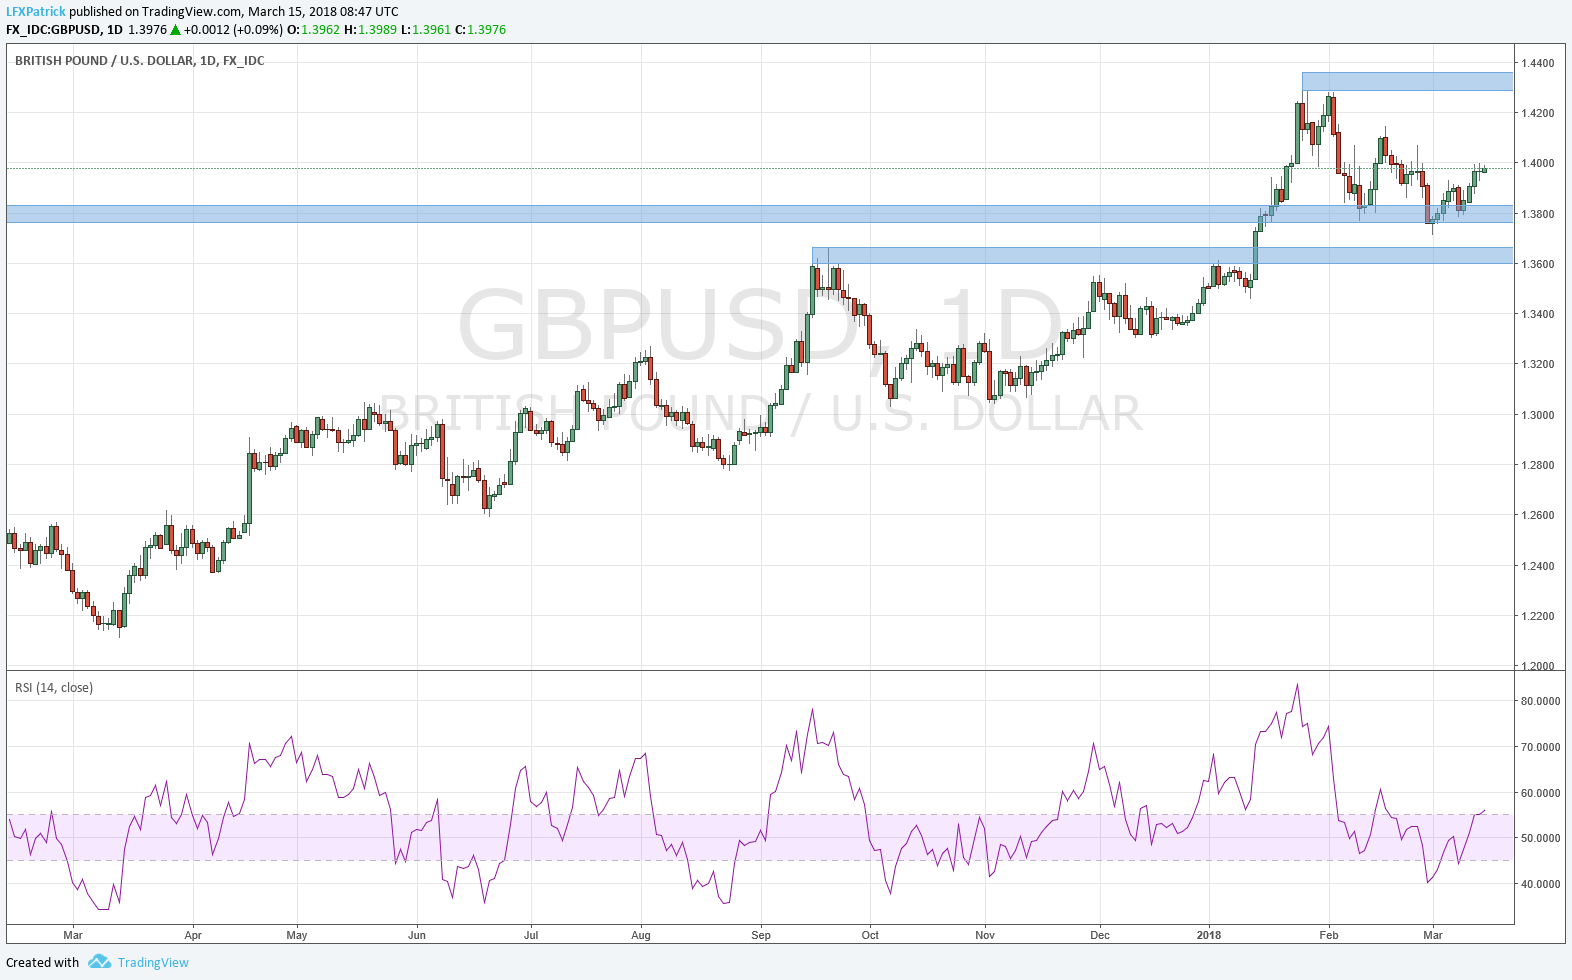 GBP/USD 1 Day Chart